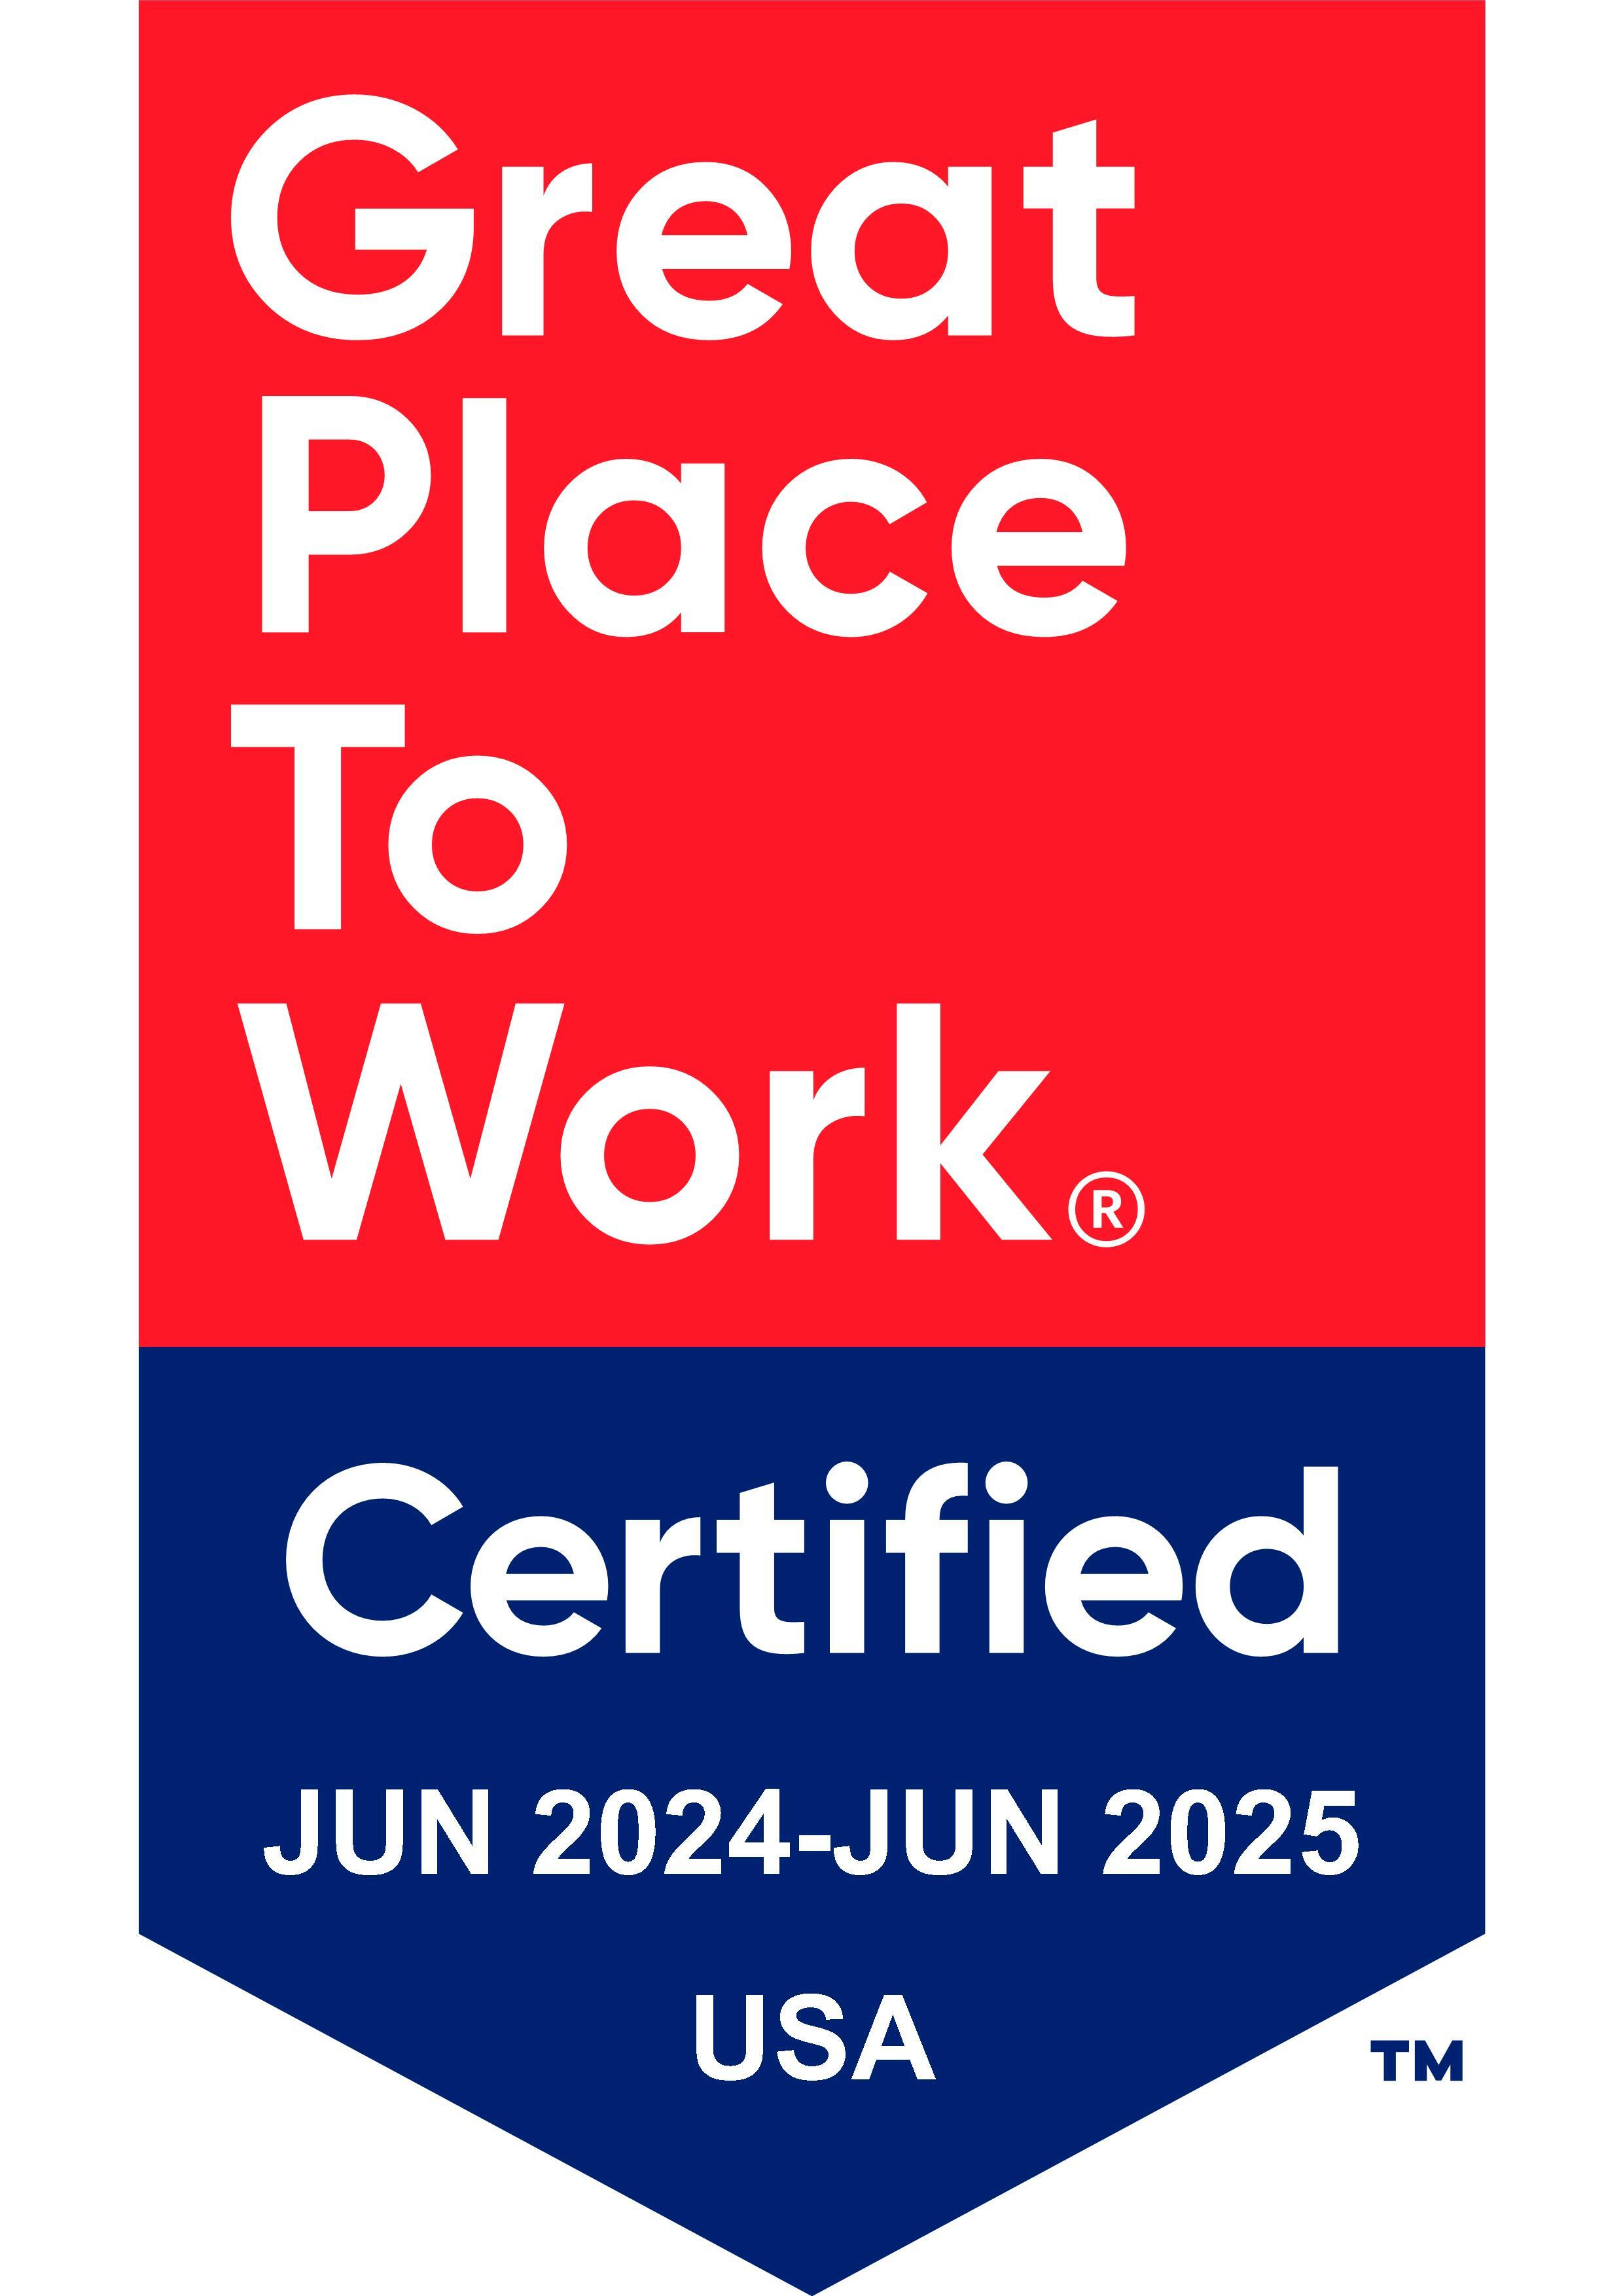 Great Place to Work Certified June 2024 - June 2025 USA